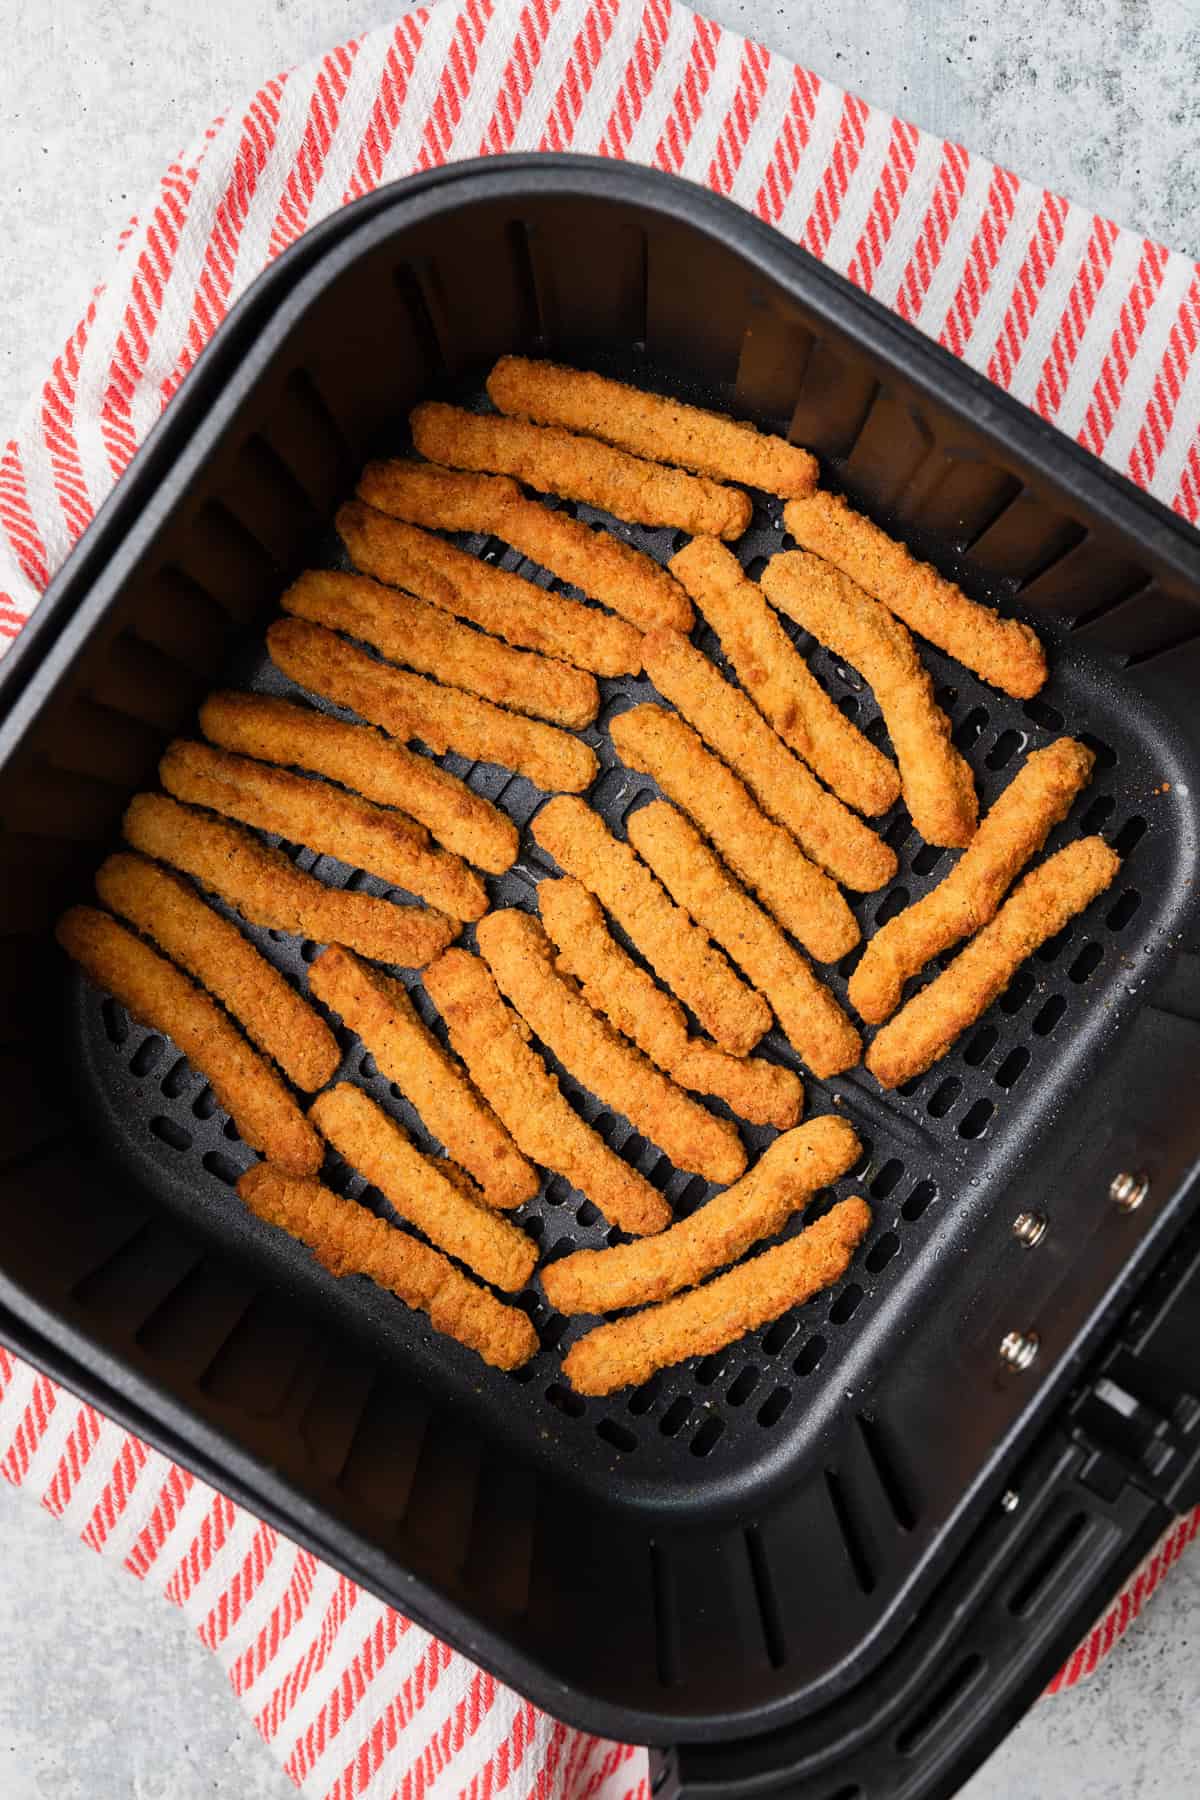 Cooked chicken fries in the air fry basket.